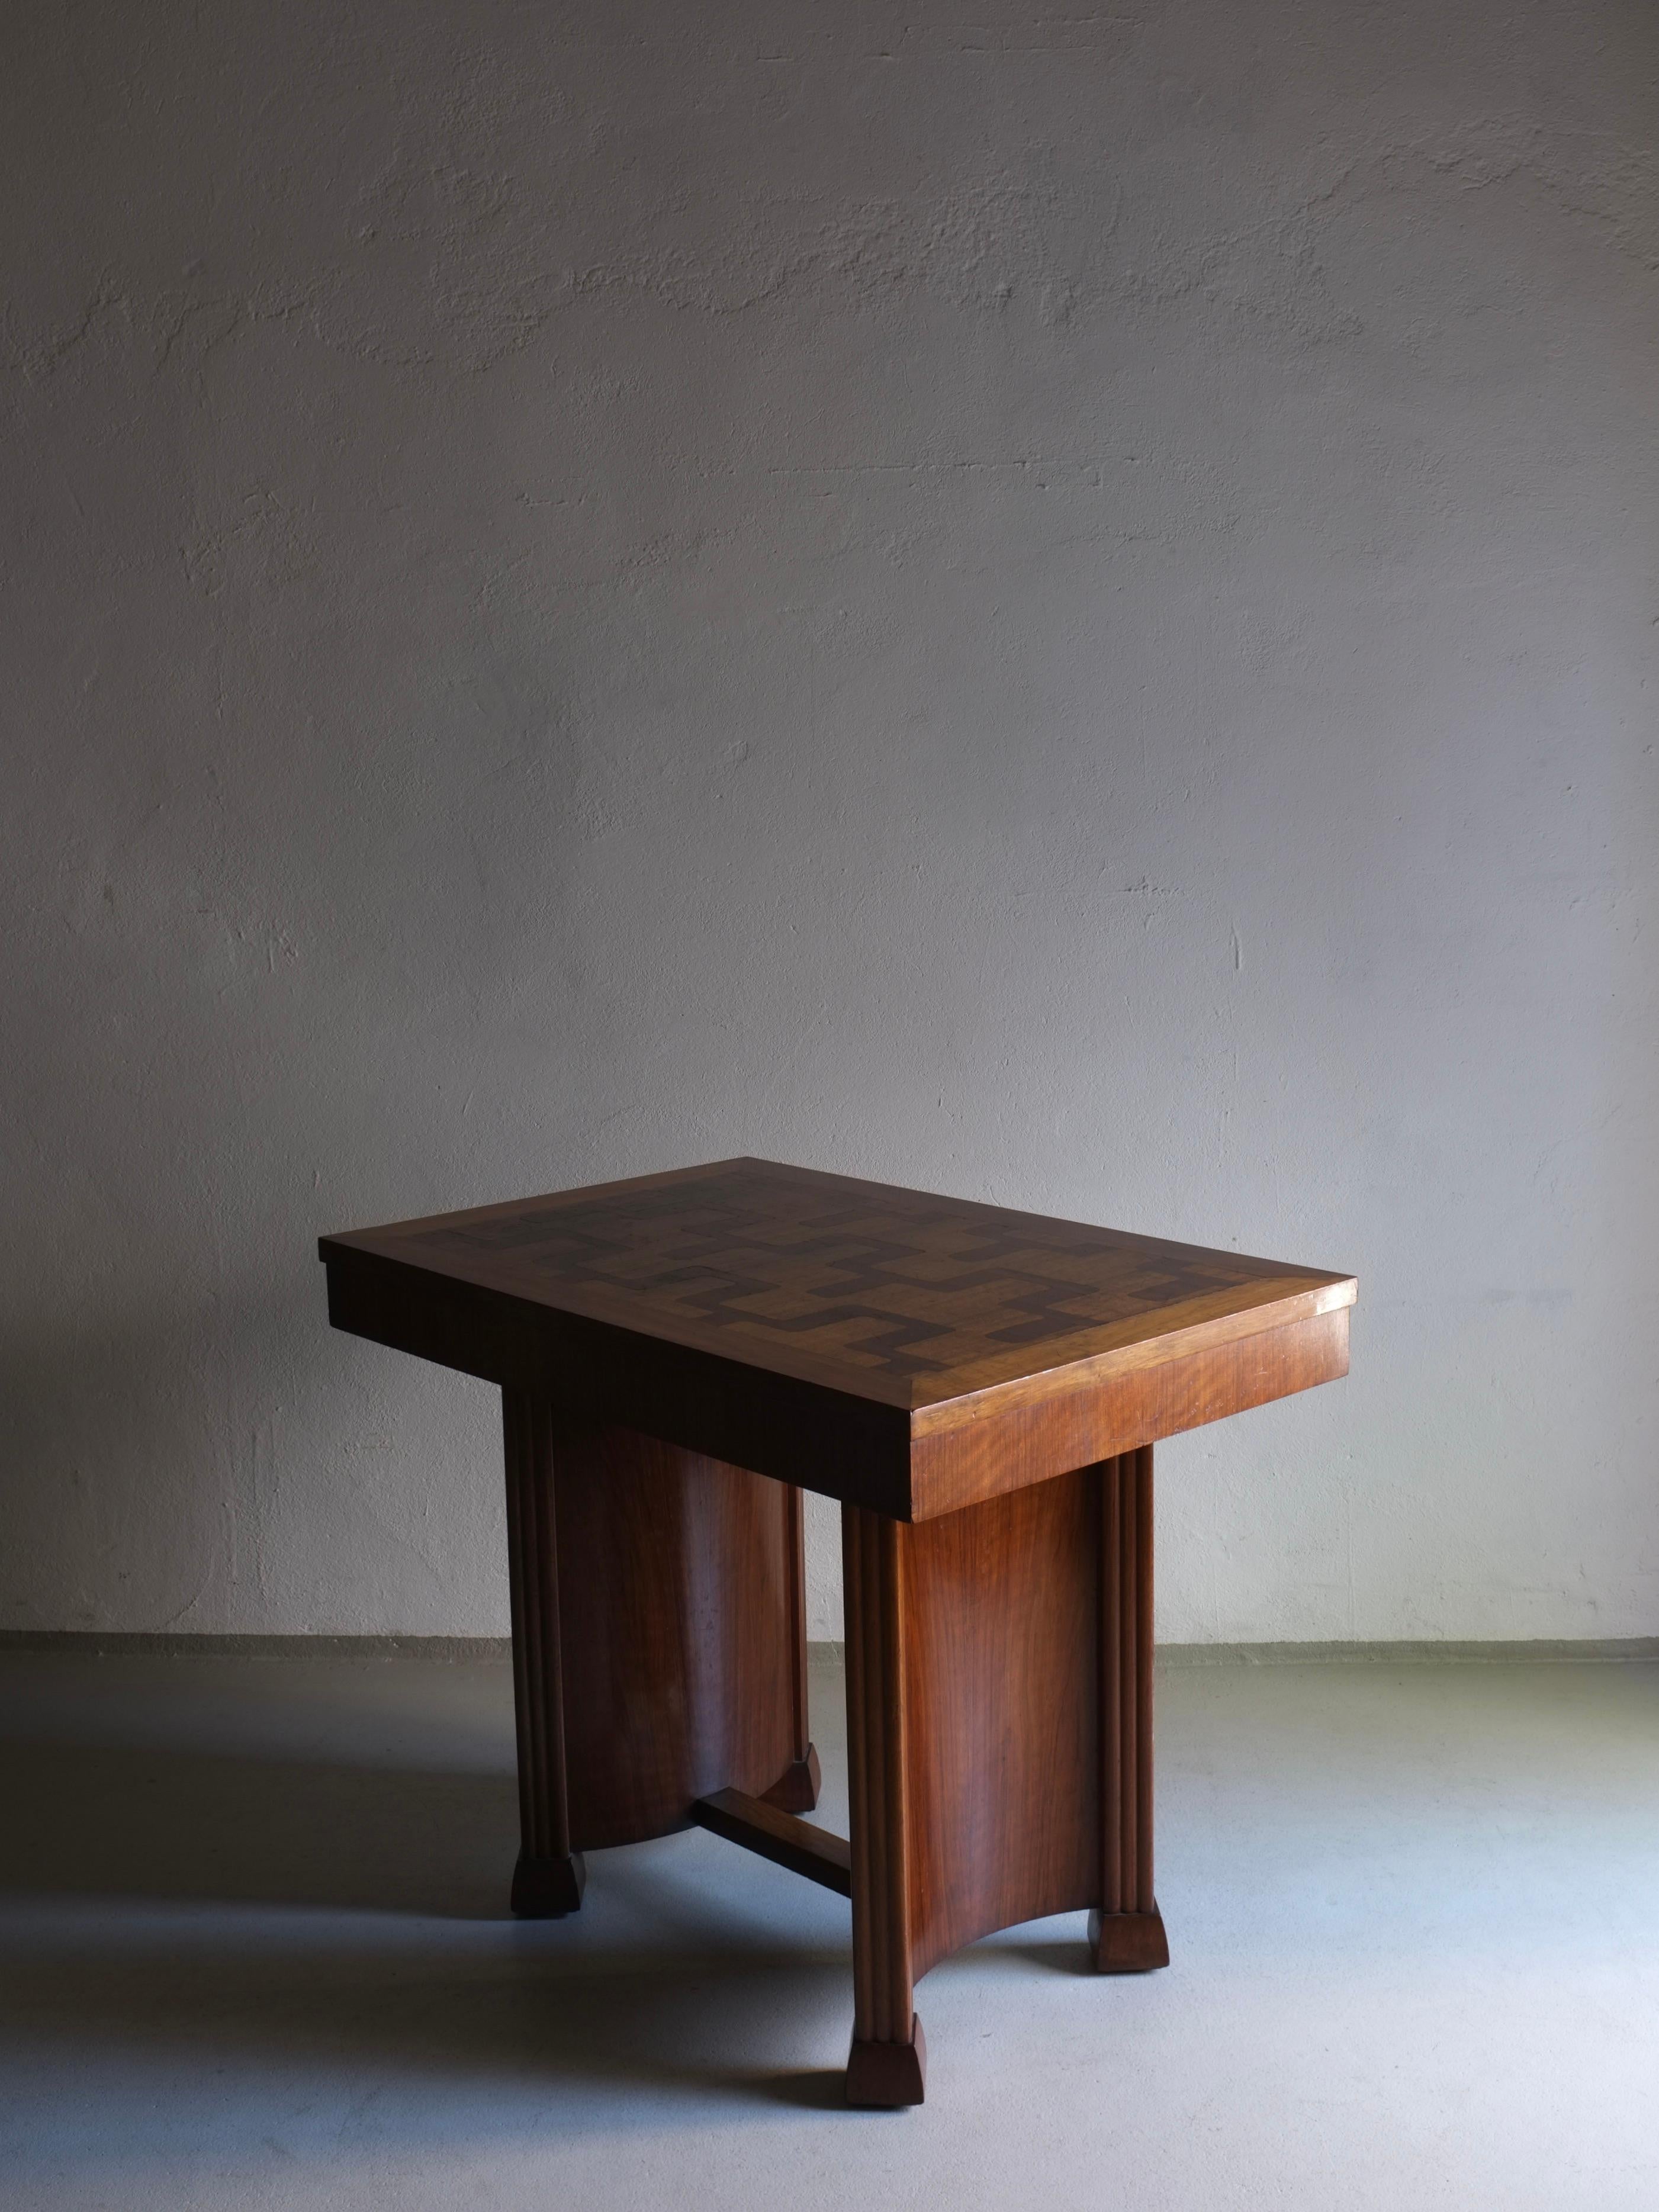 Art Deco side table or a writing desk with inlaid details.
H 74 cm, H (tabletop) 10 cm, W 92 cm, D 61 cm 
